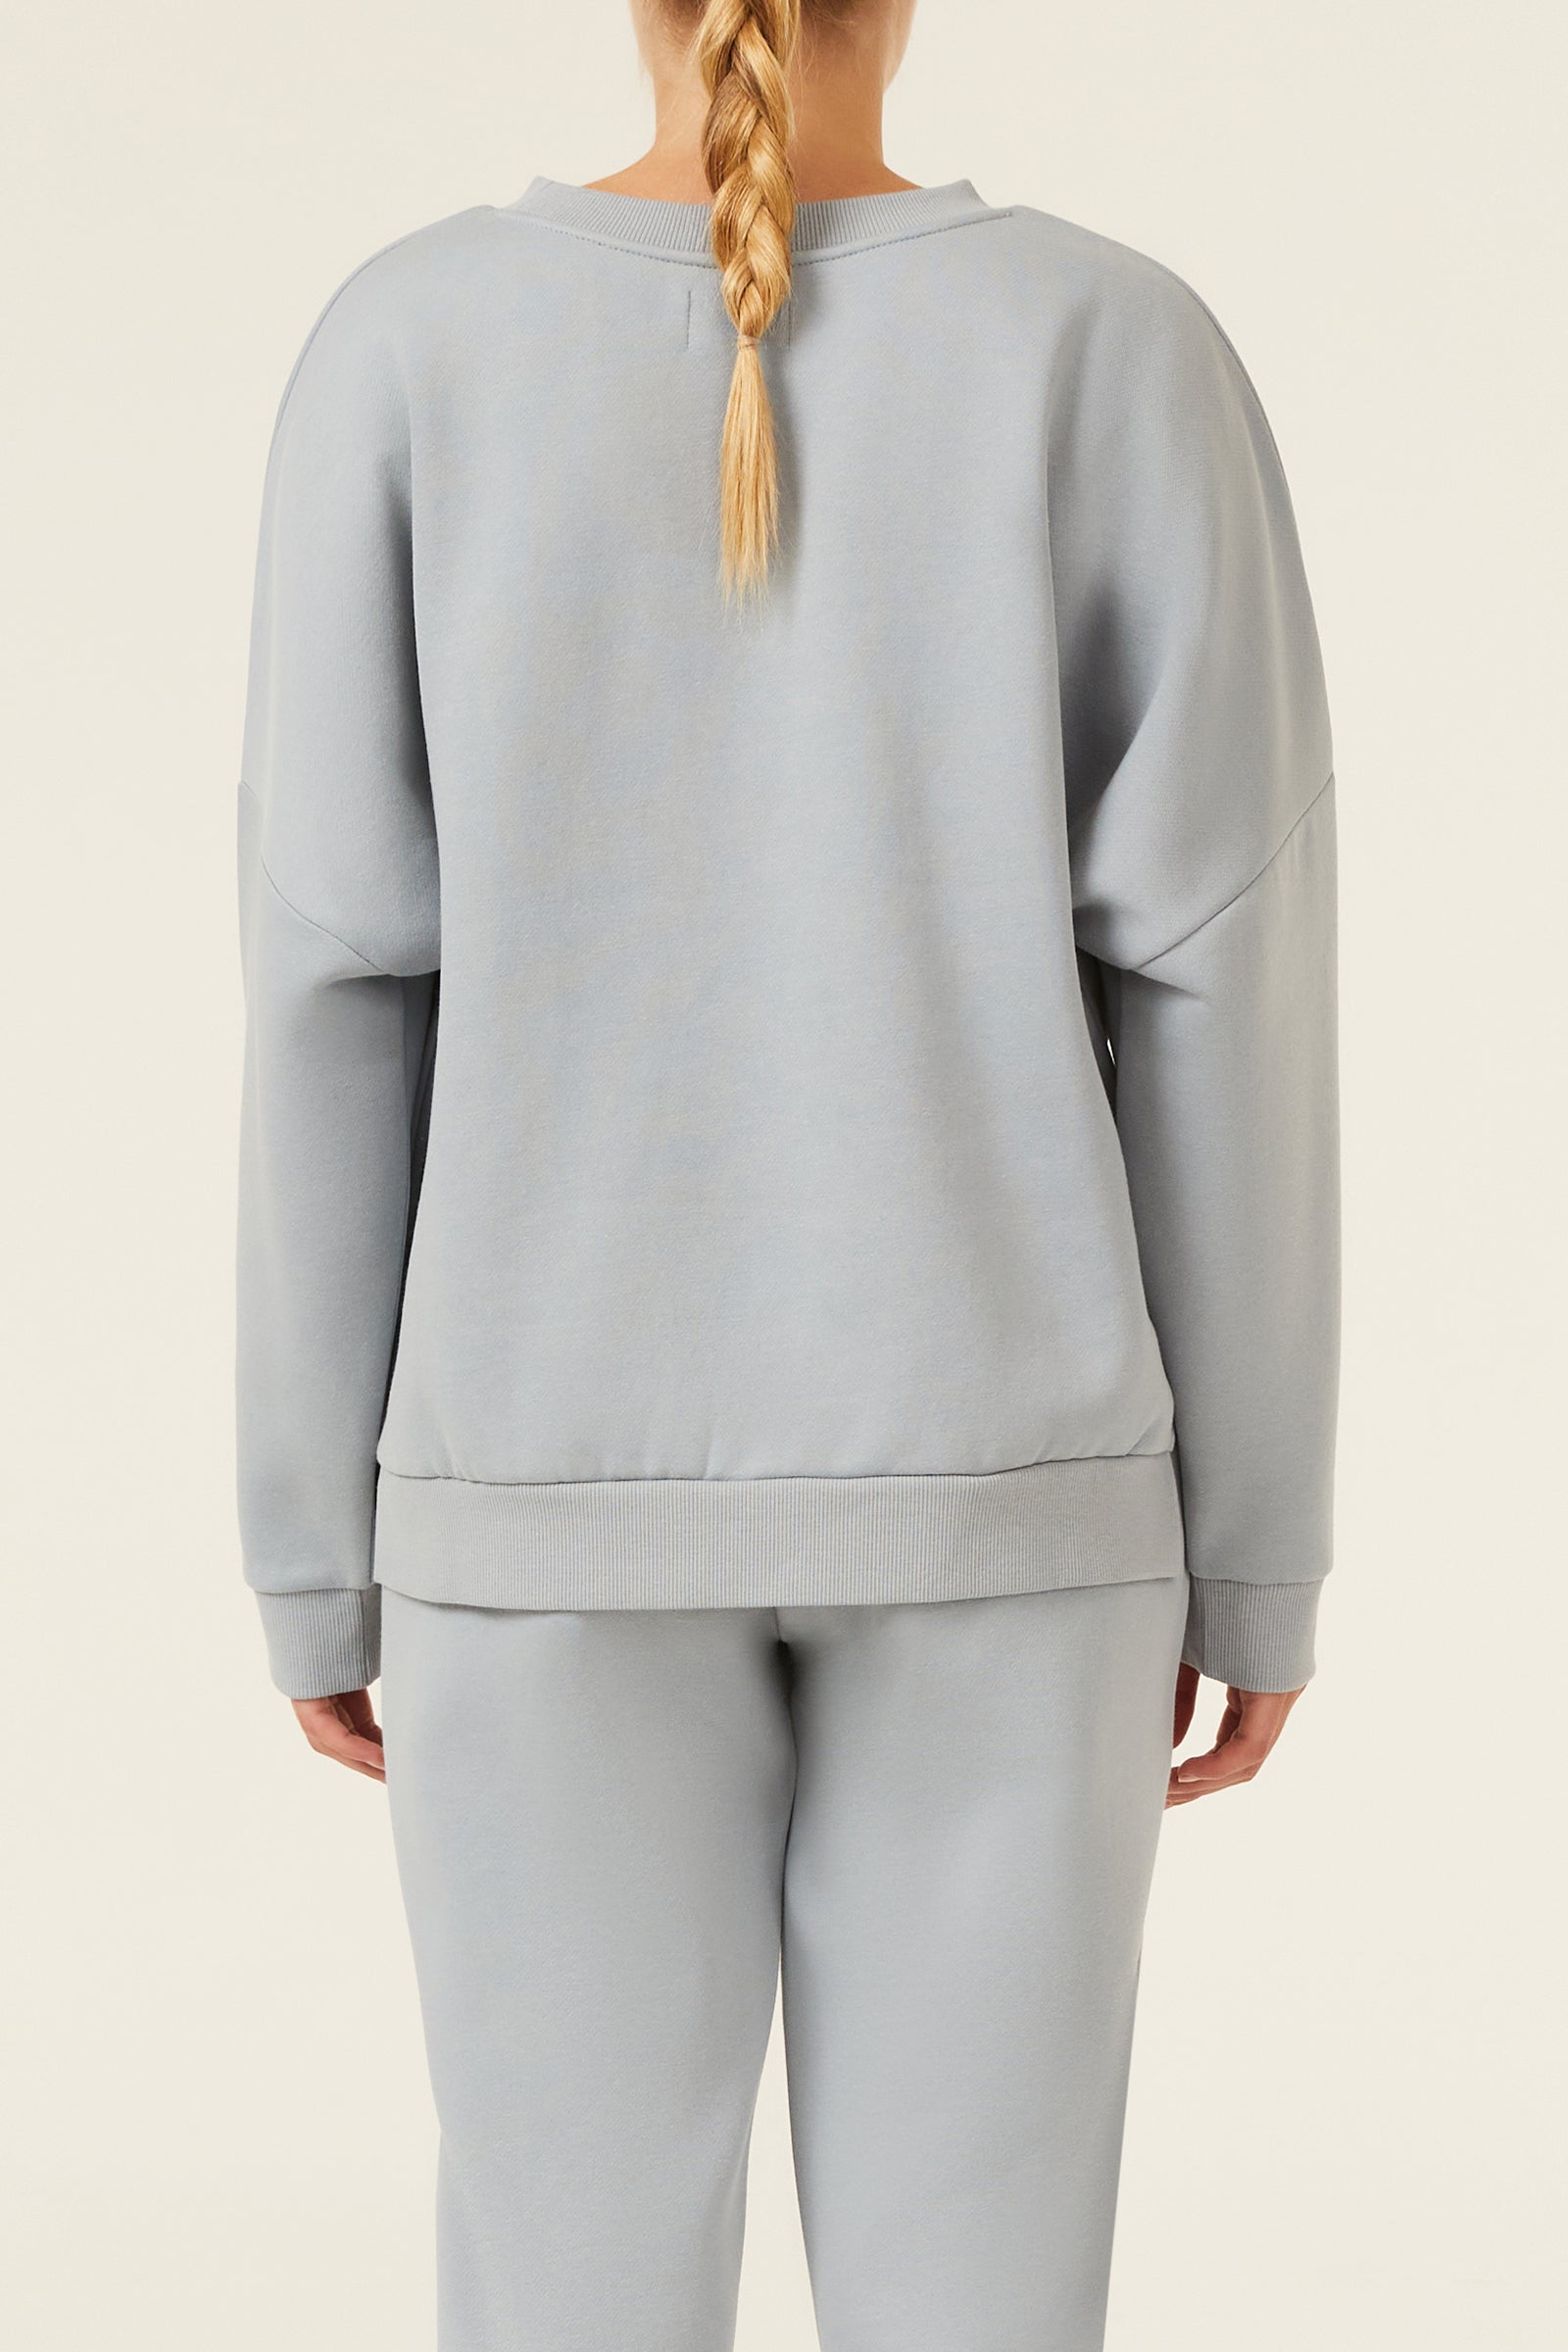 Nude Lucy Carter Classic Oversized Sweat In a Green & Blue Toned Marine Colour